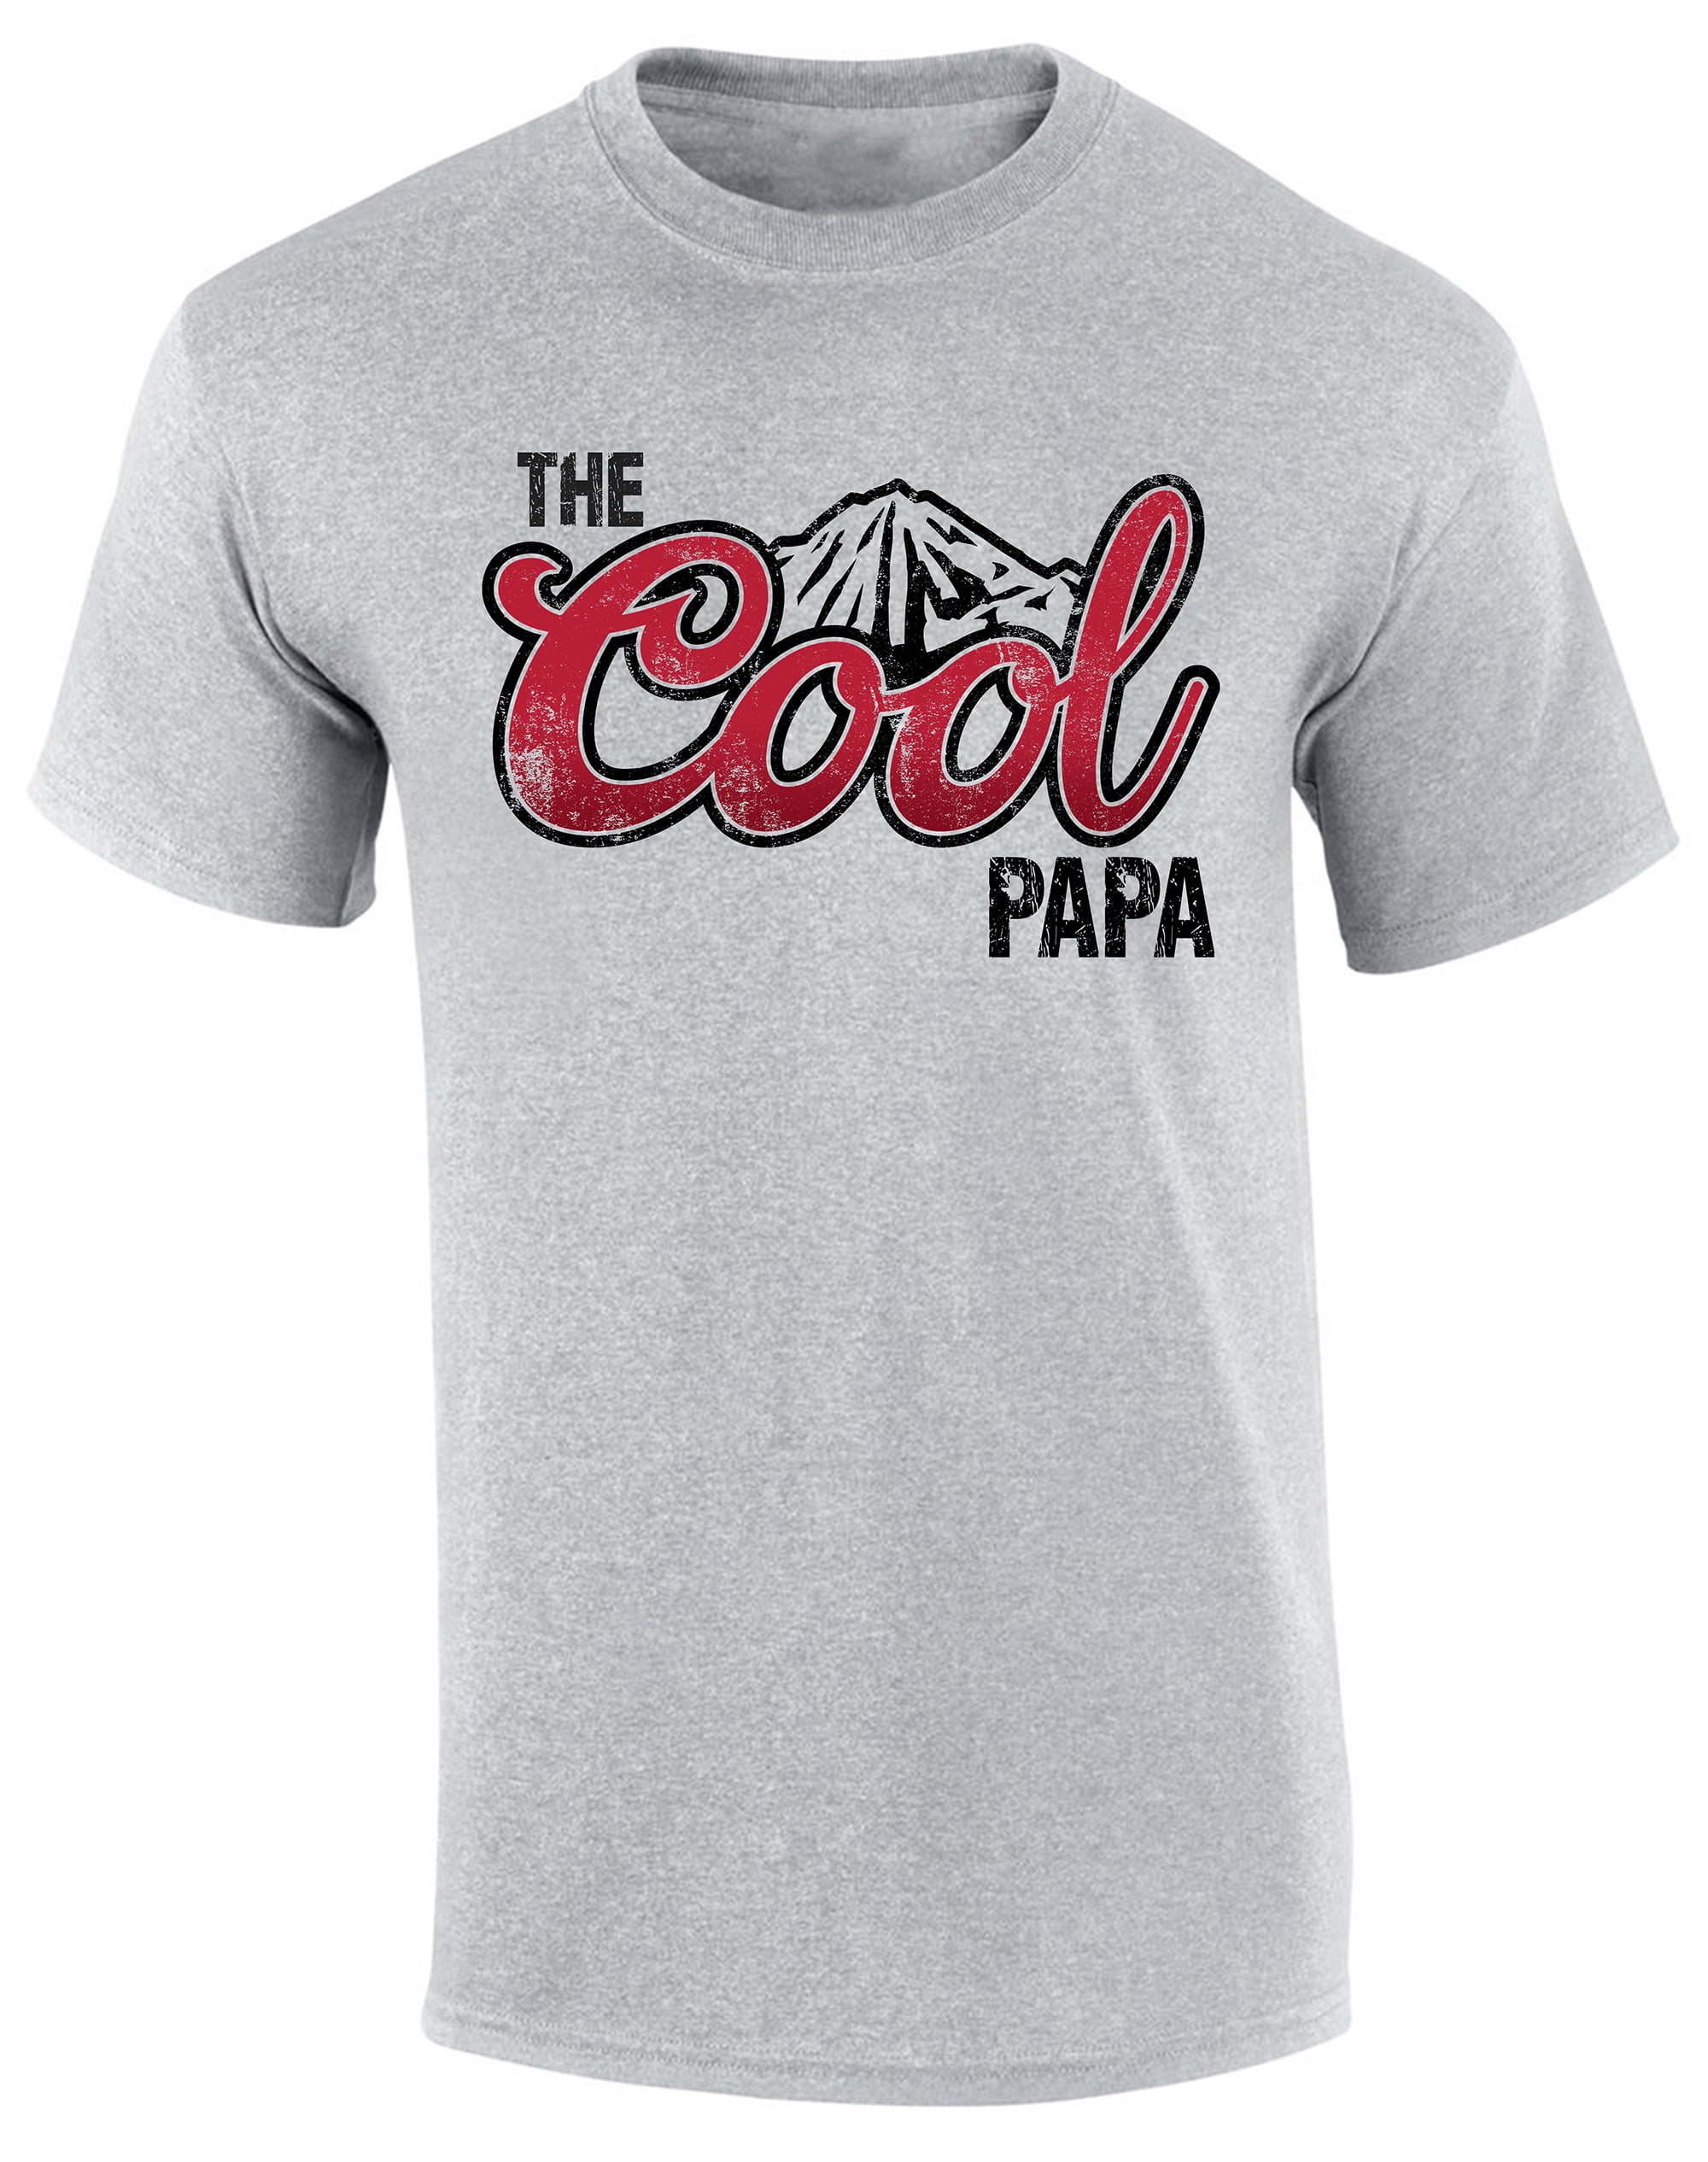 Mens The Cool Papa Shirt Funny Cold Mountains American Can Logo Parody  Short Sleeve T-shirt Graphic Tee-Sports Gray-xxl 